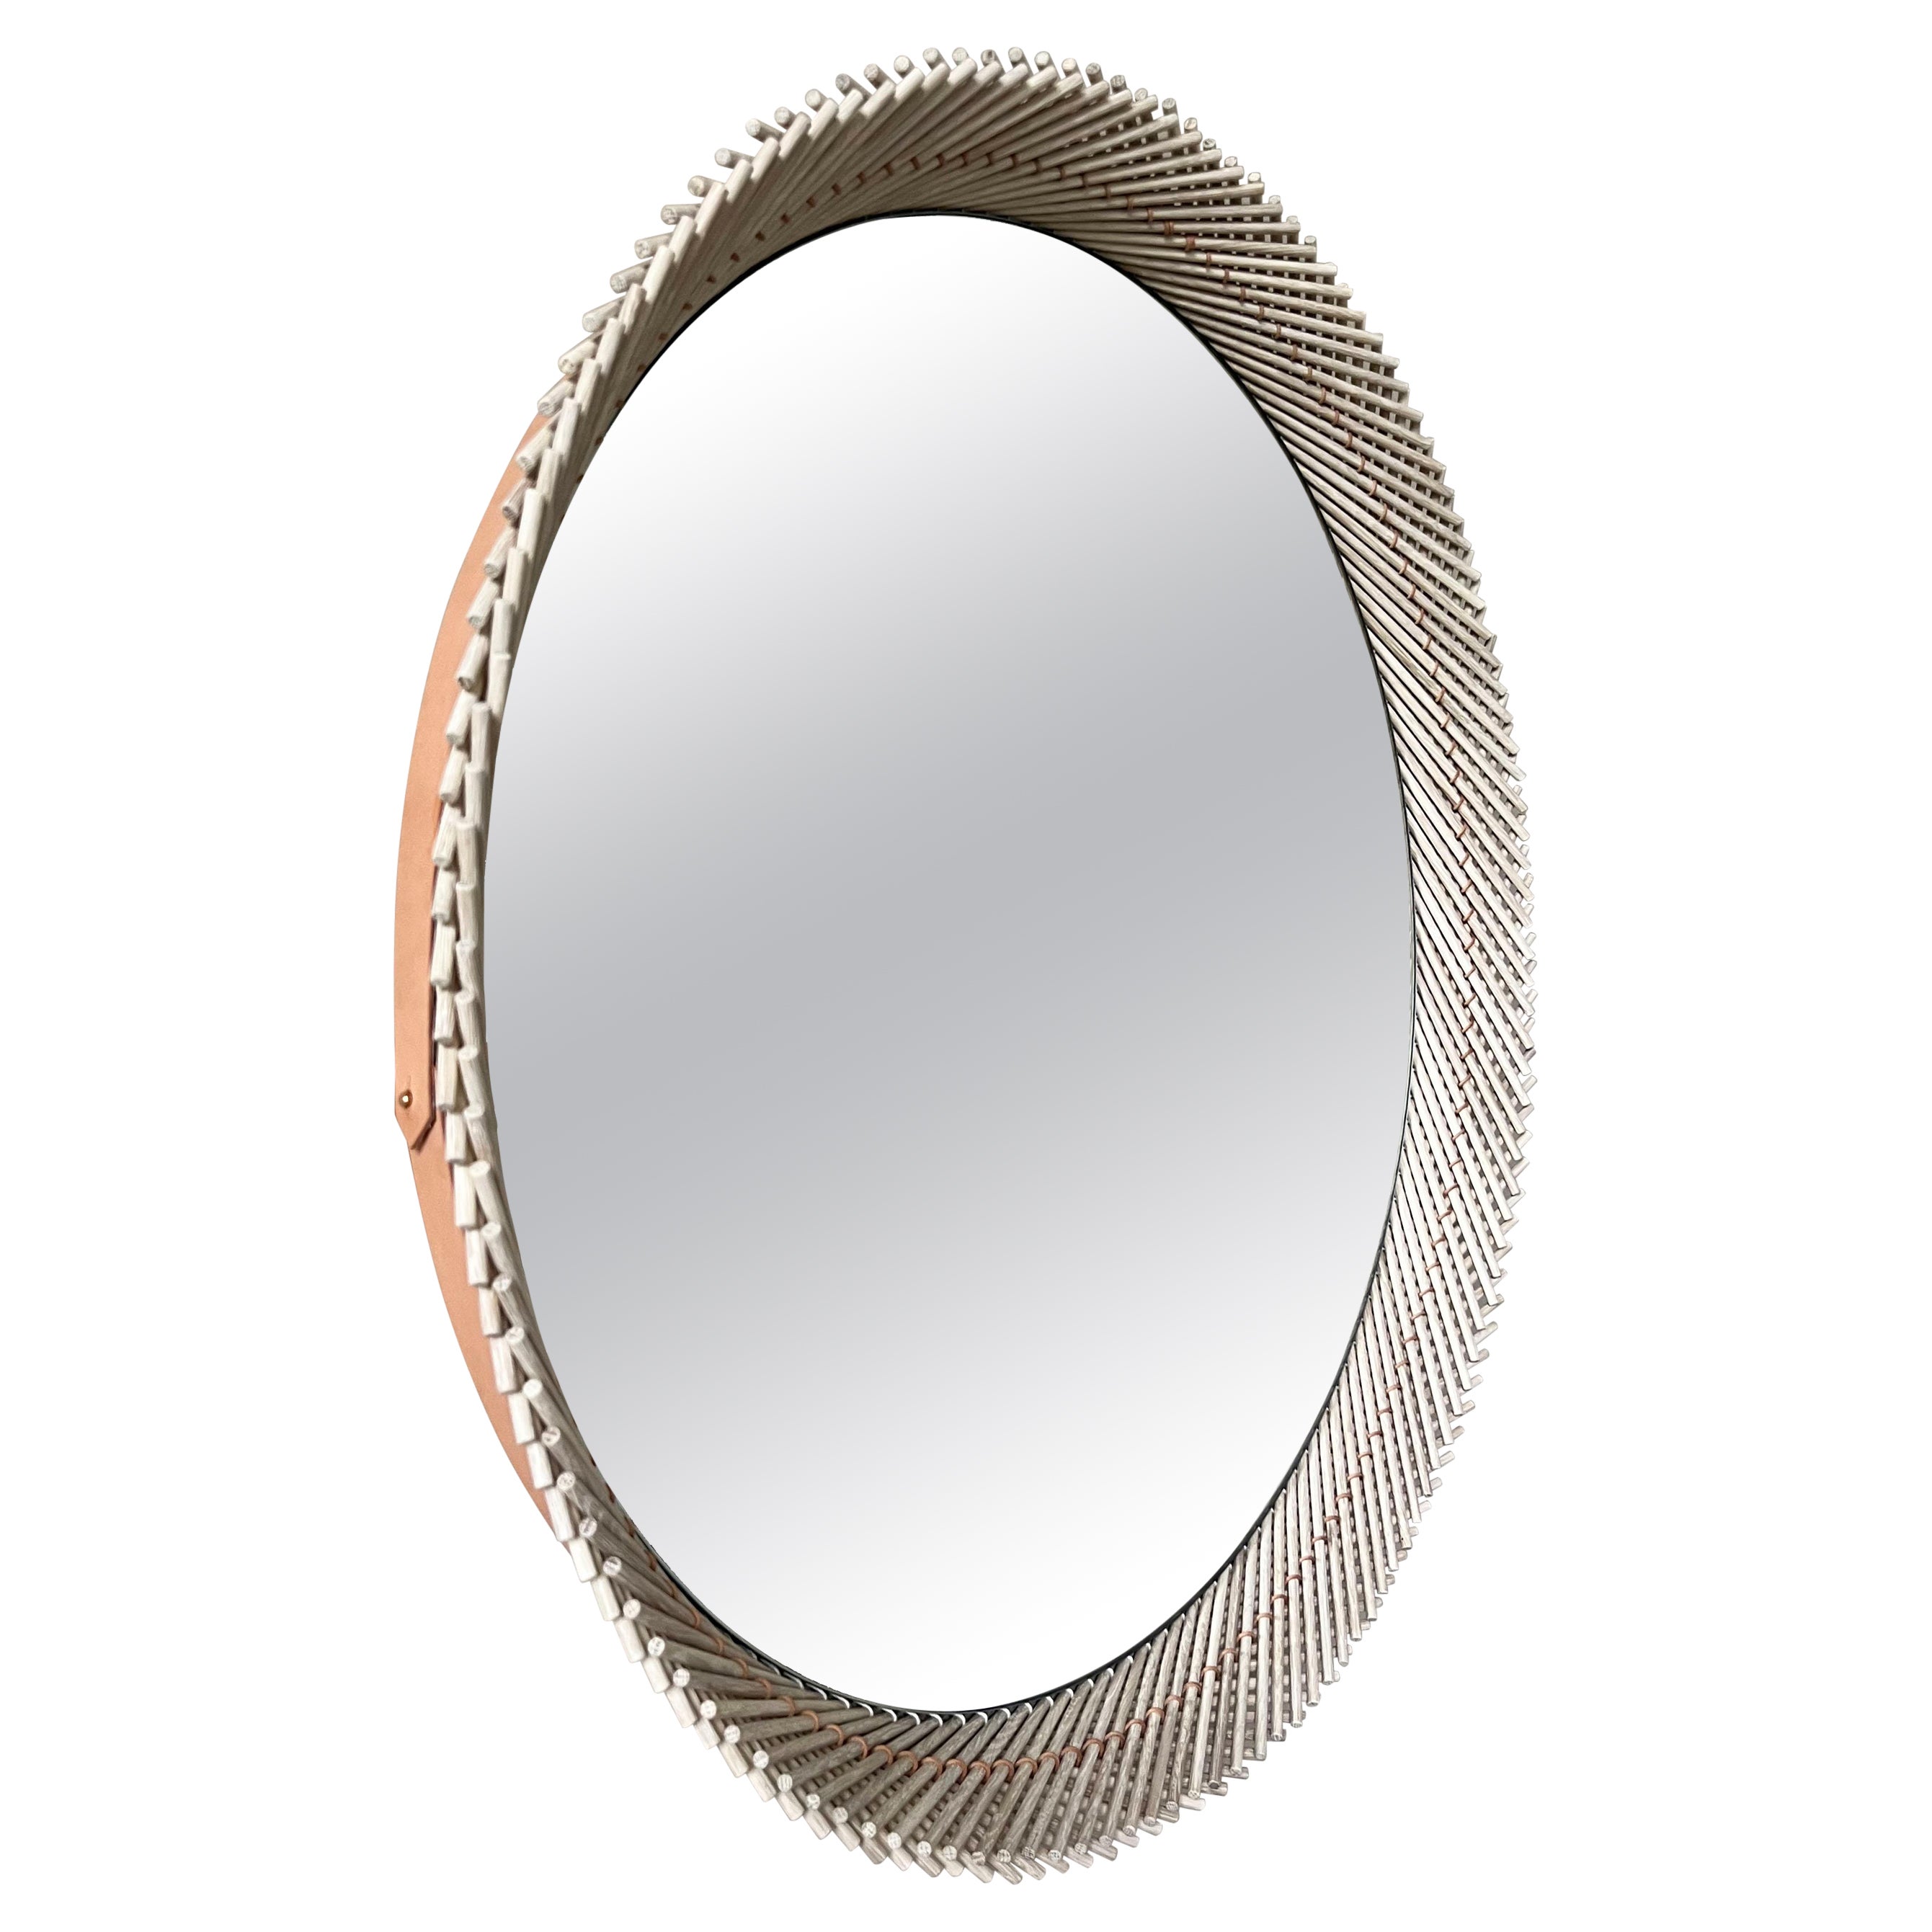 Mooda Round Mirror 30 / Bleached Oak Wood, Clear Mirror, Leather Stitch by INDO- For Sale